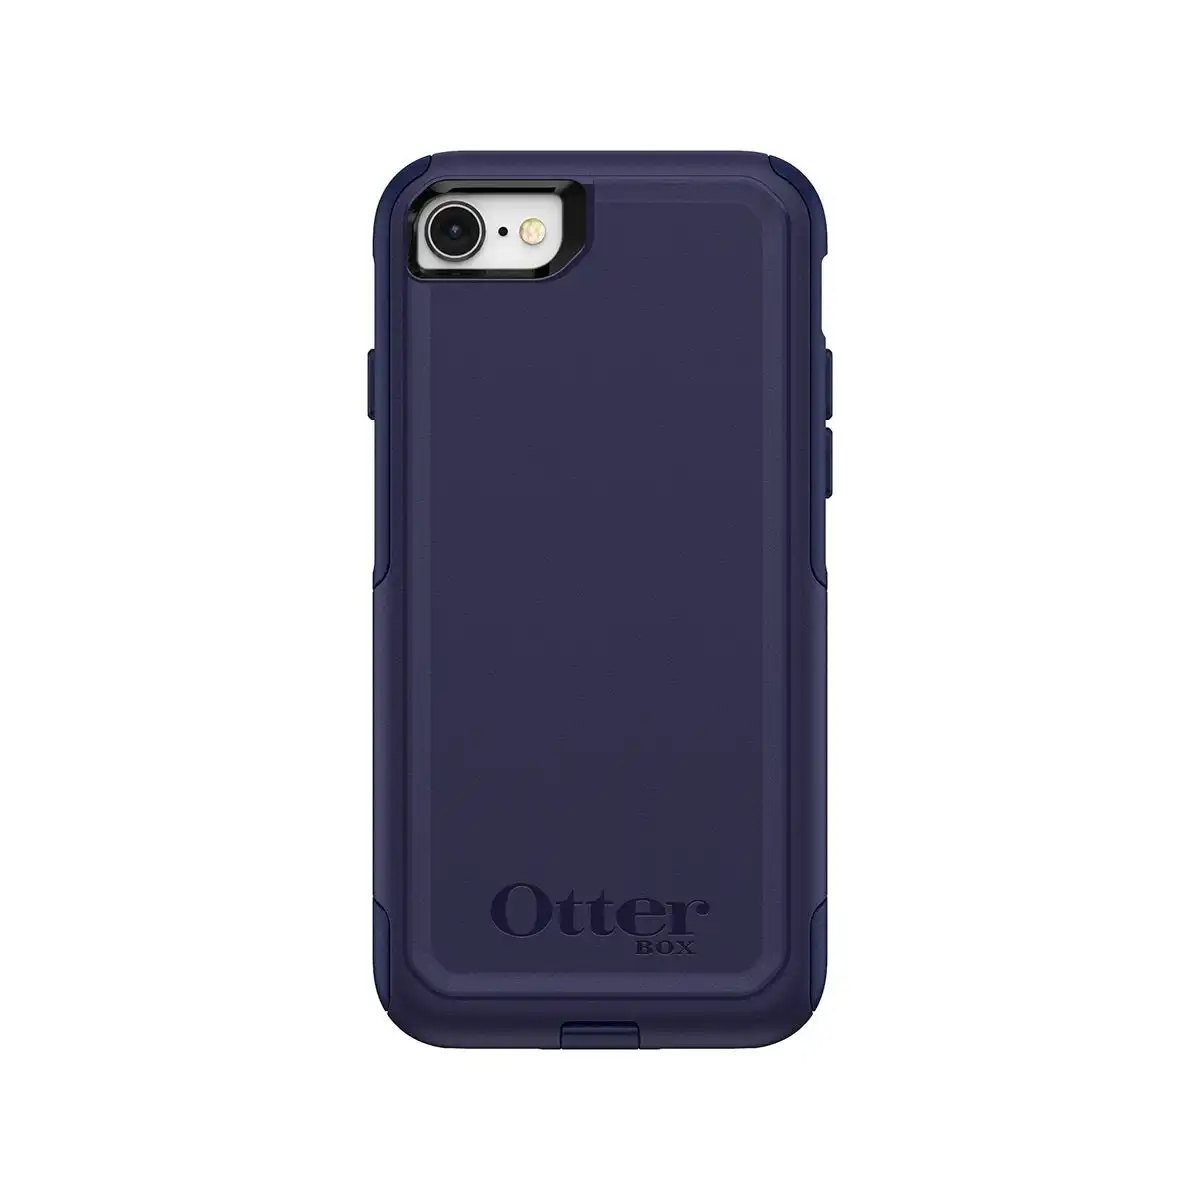 Otterbox Commuter Phone Case for iPhone 7/8 - Indigo Way